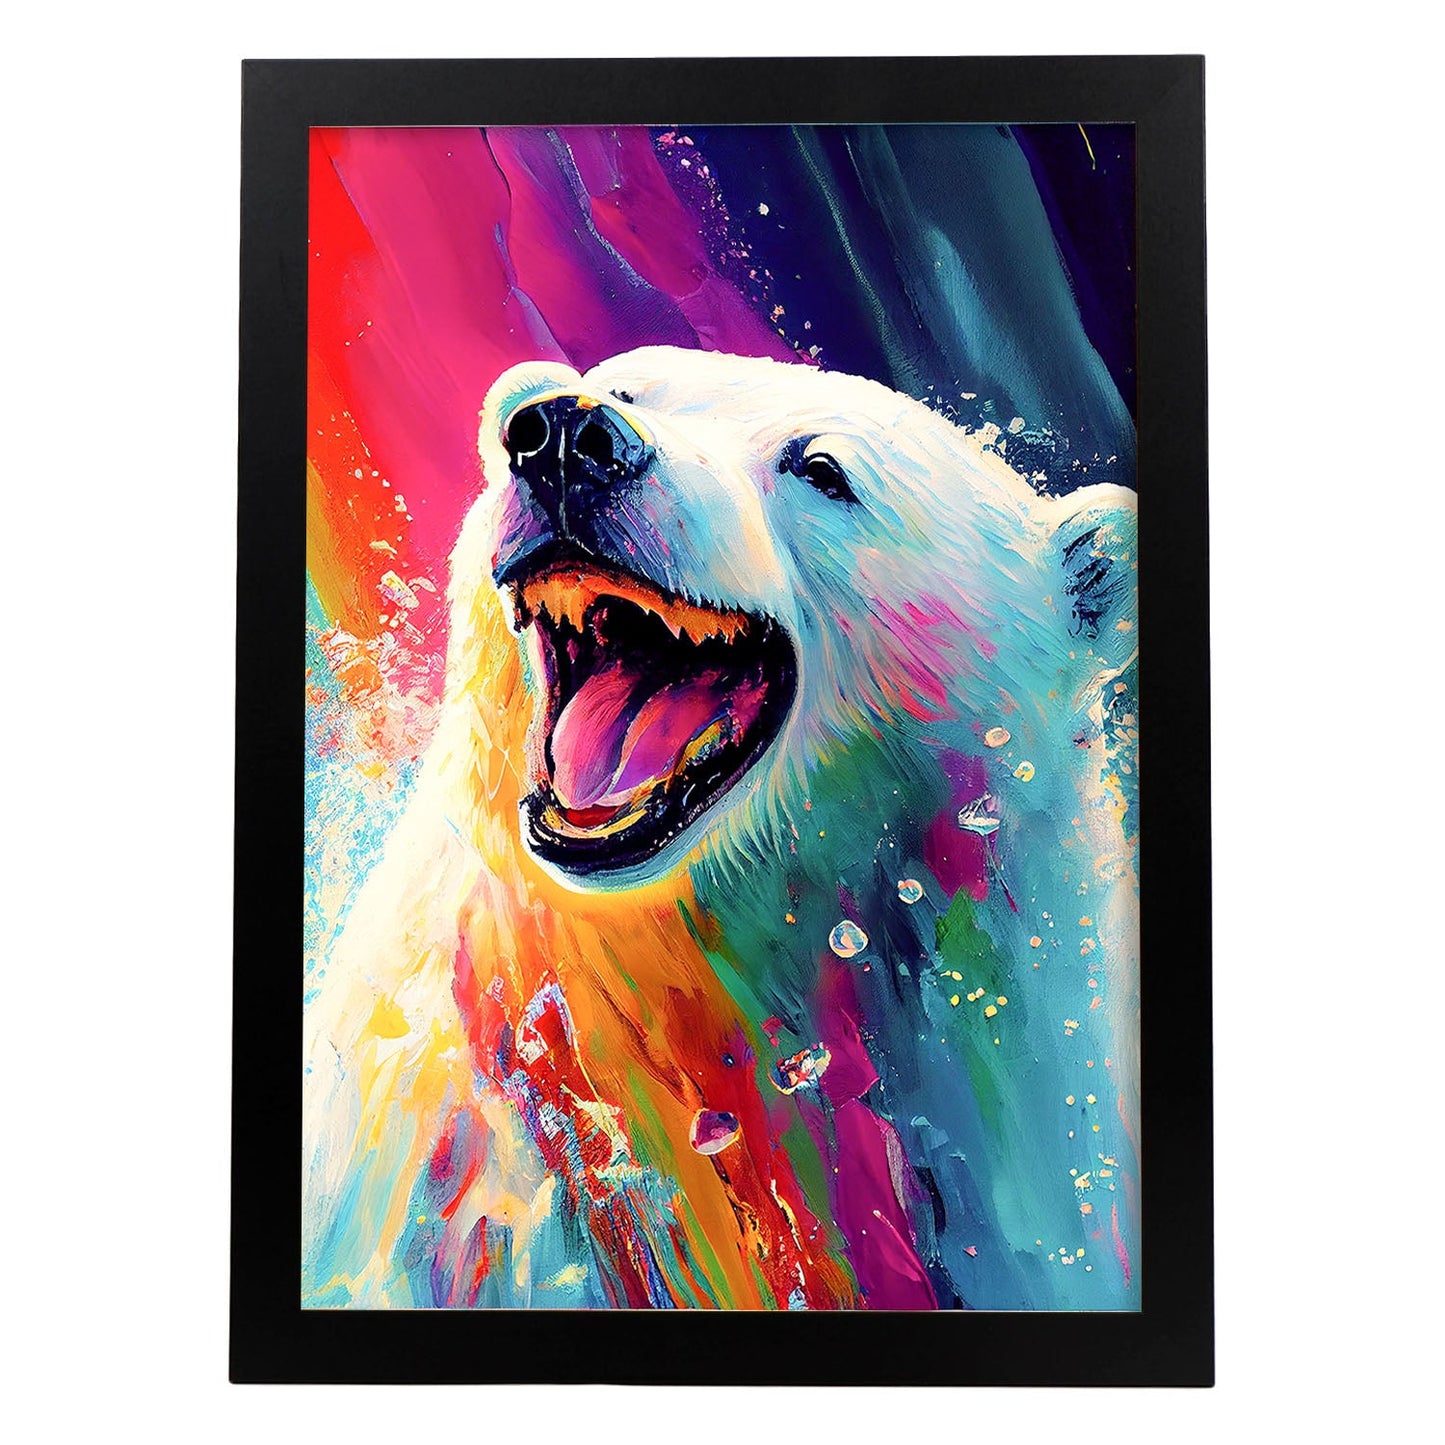 Nacnic Abstract smiling Polar Bear in Lisa Fran Style_1. Aesthetic Wall Art Prints for Bedroom or Living Room Design.